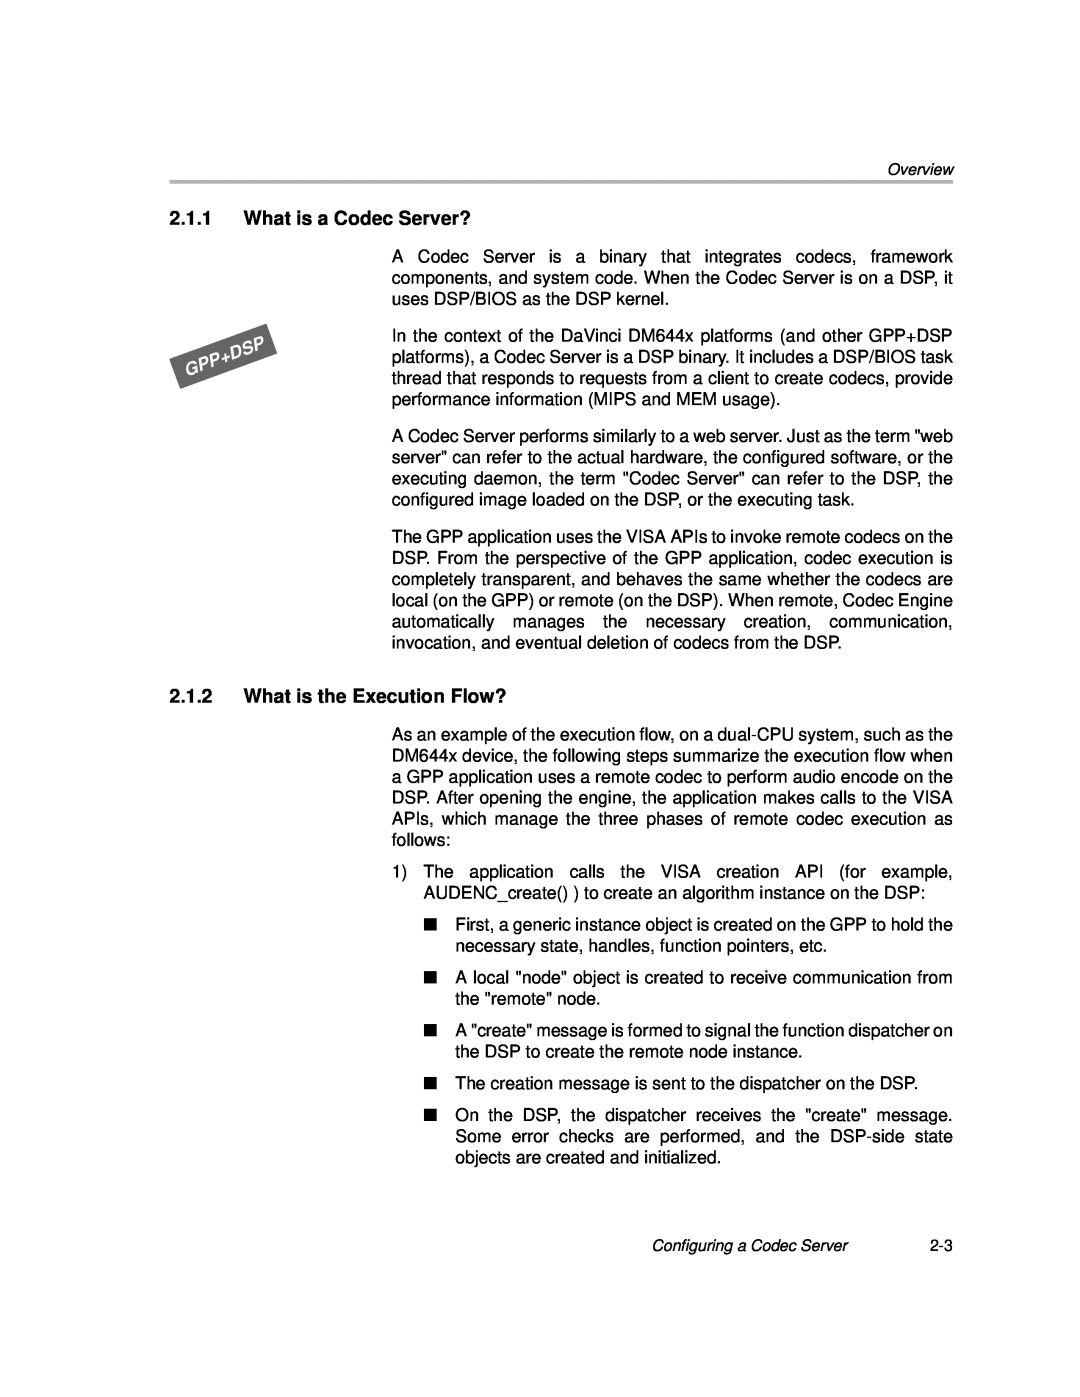 Texas Instruments Codec Engine Server manual What is a Codec Server?, What is the Execution Flow? 